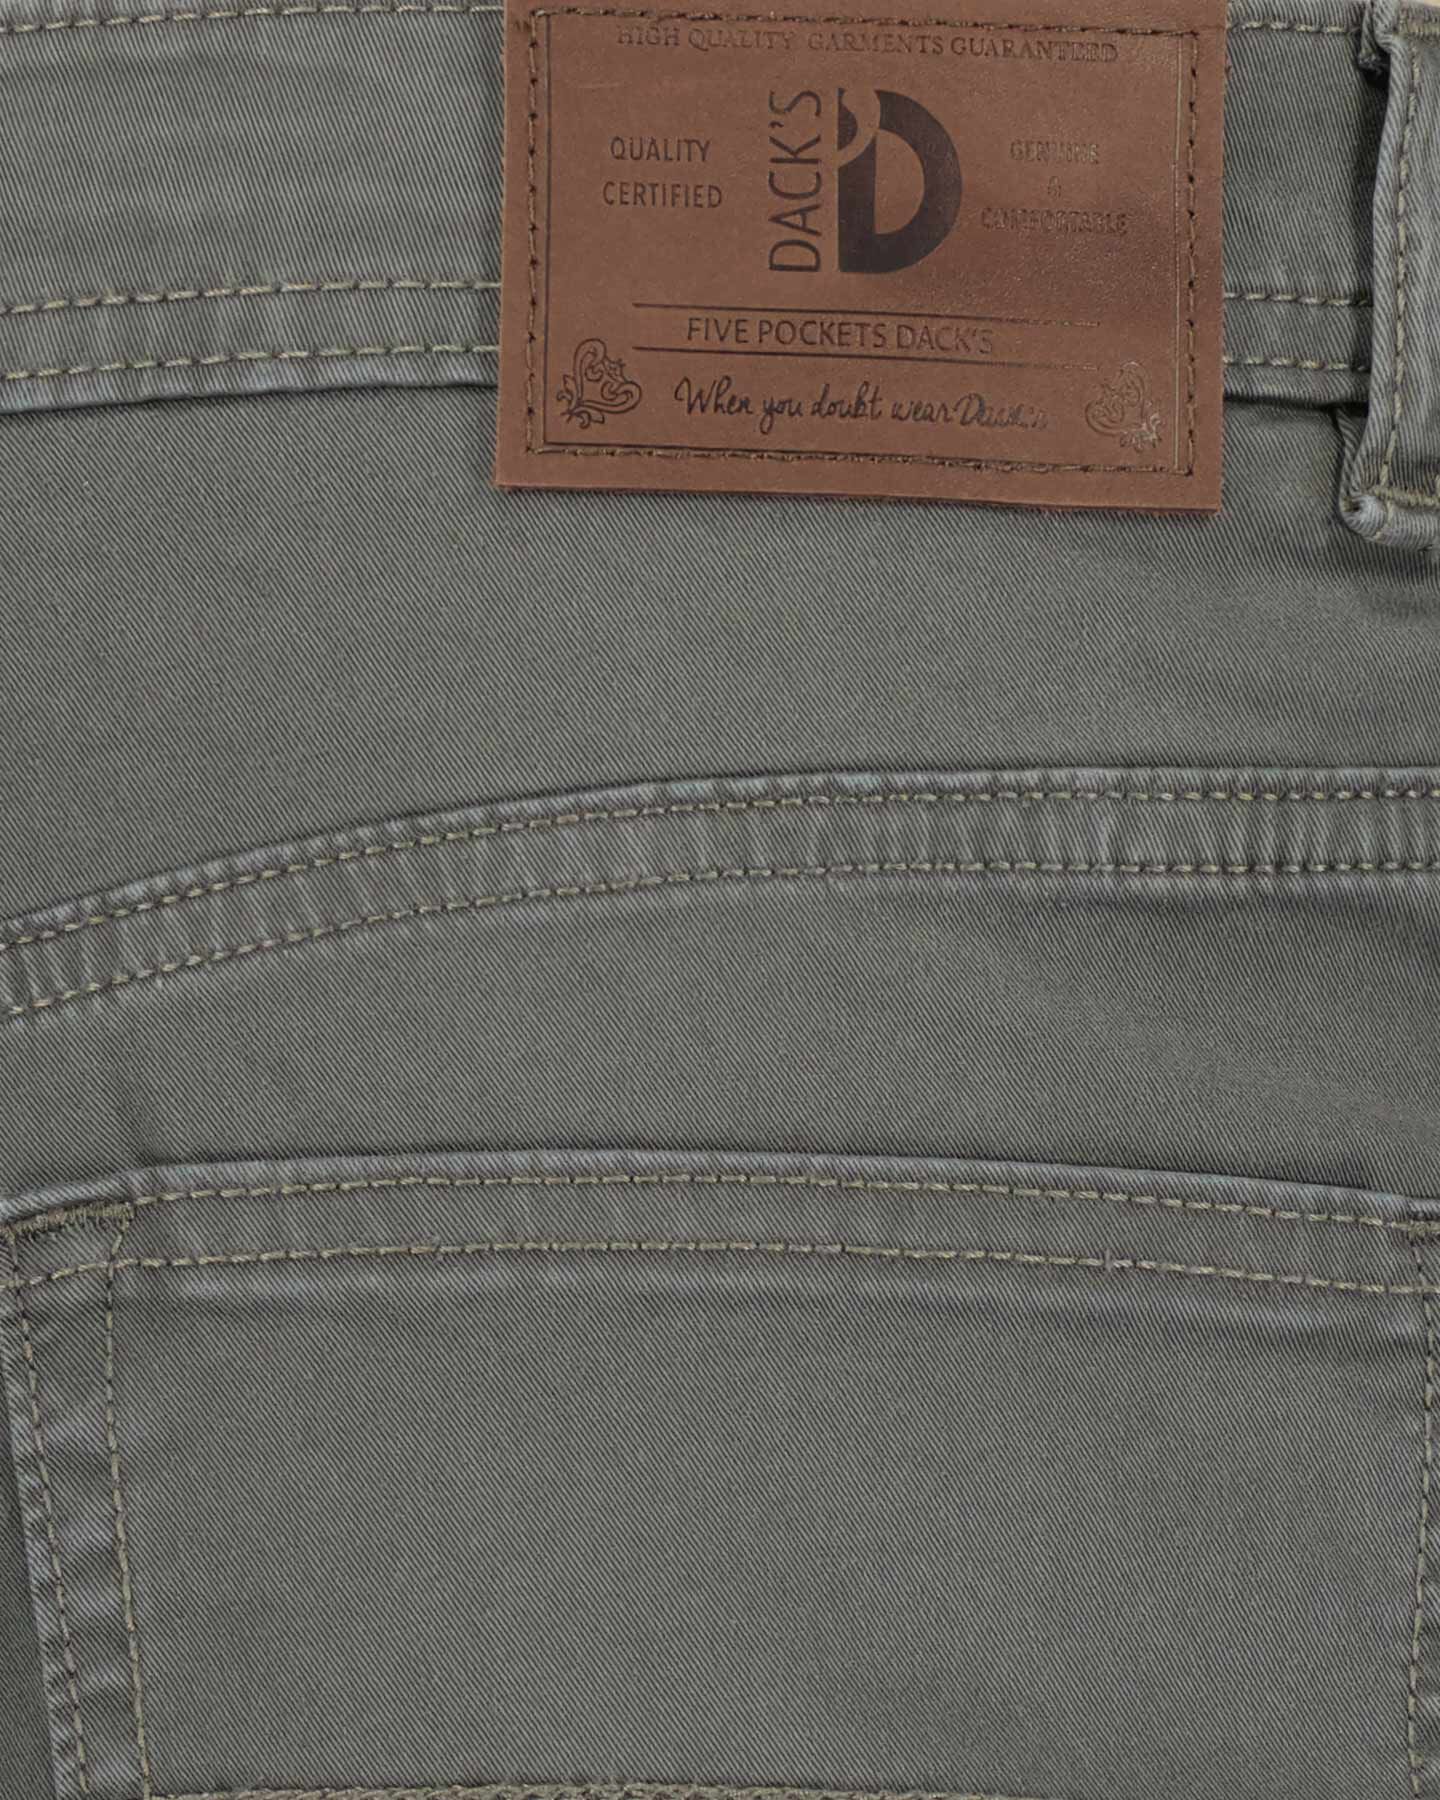  Pantalone DACK'S BASIC COLLECTION M S4118688|040|54 scatto 4